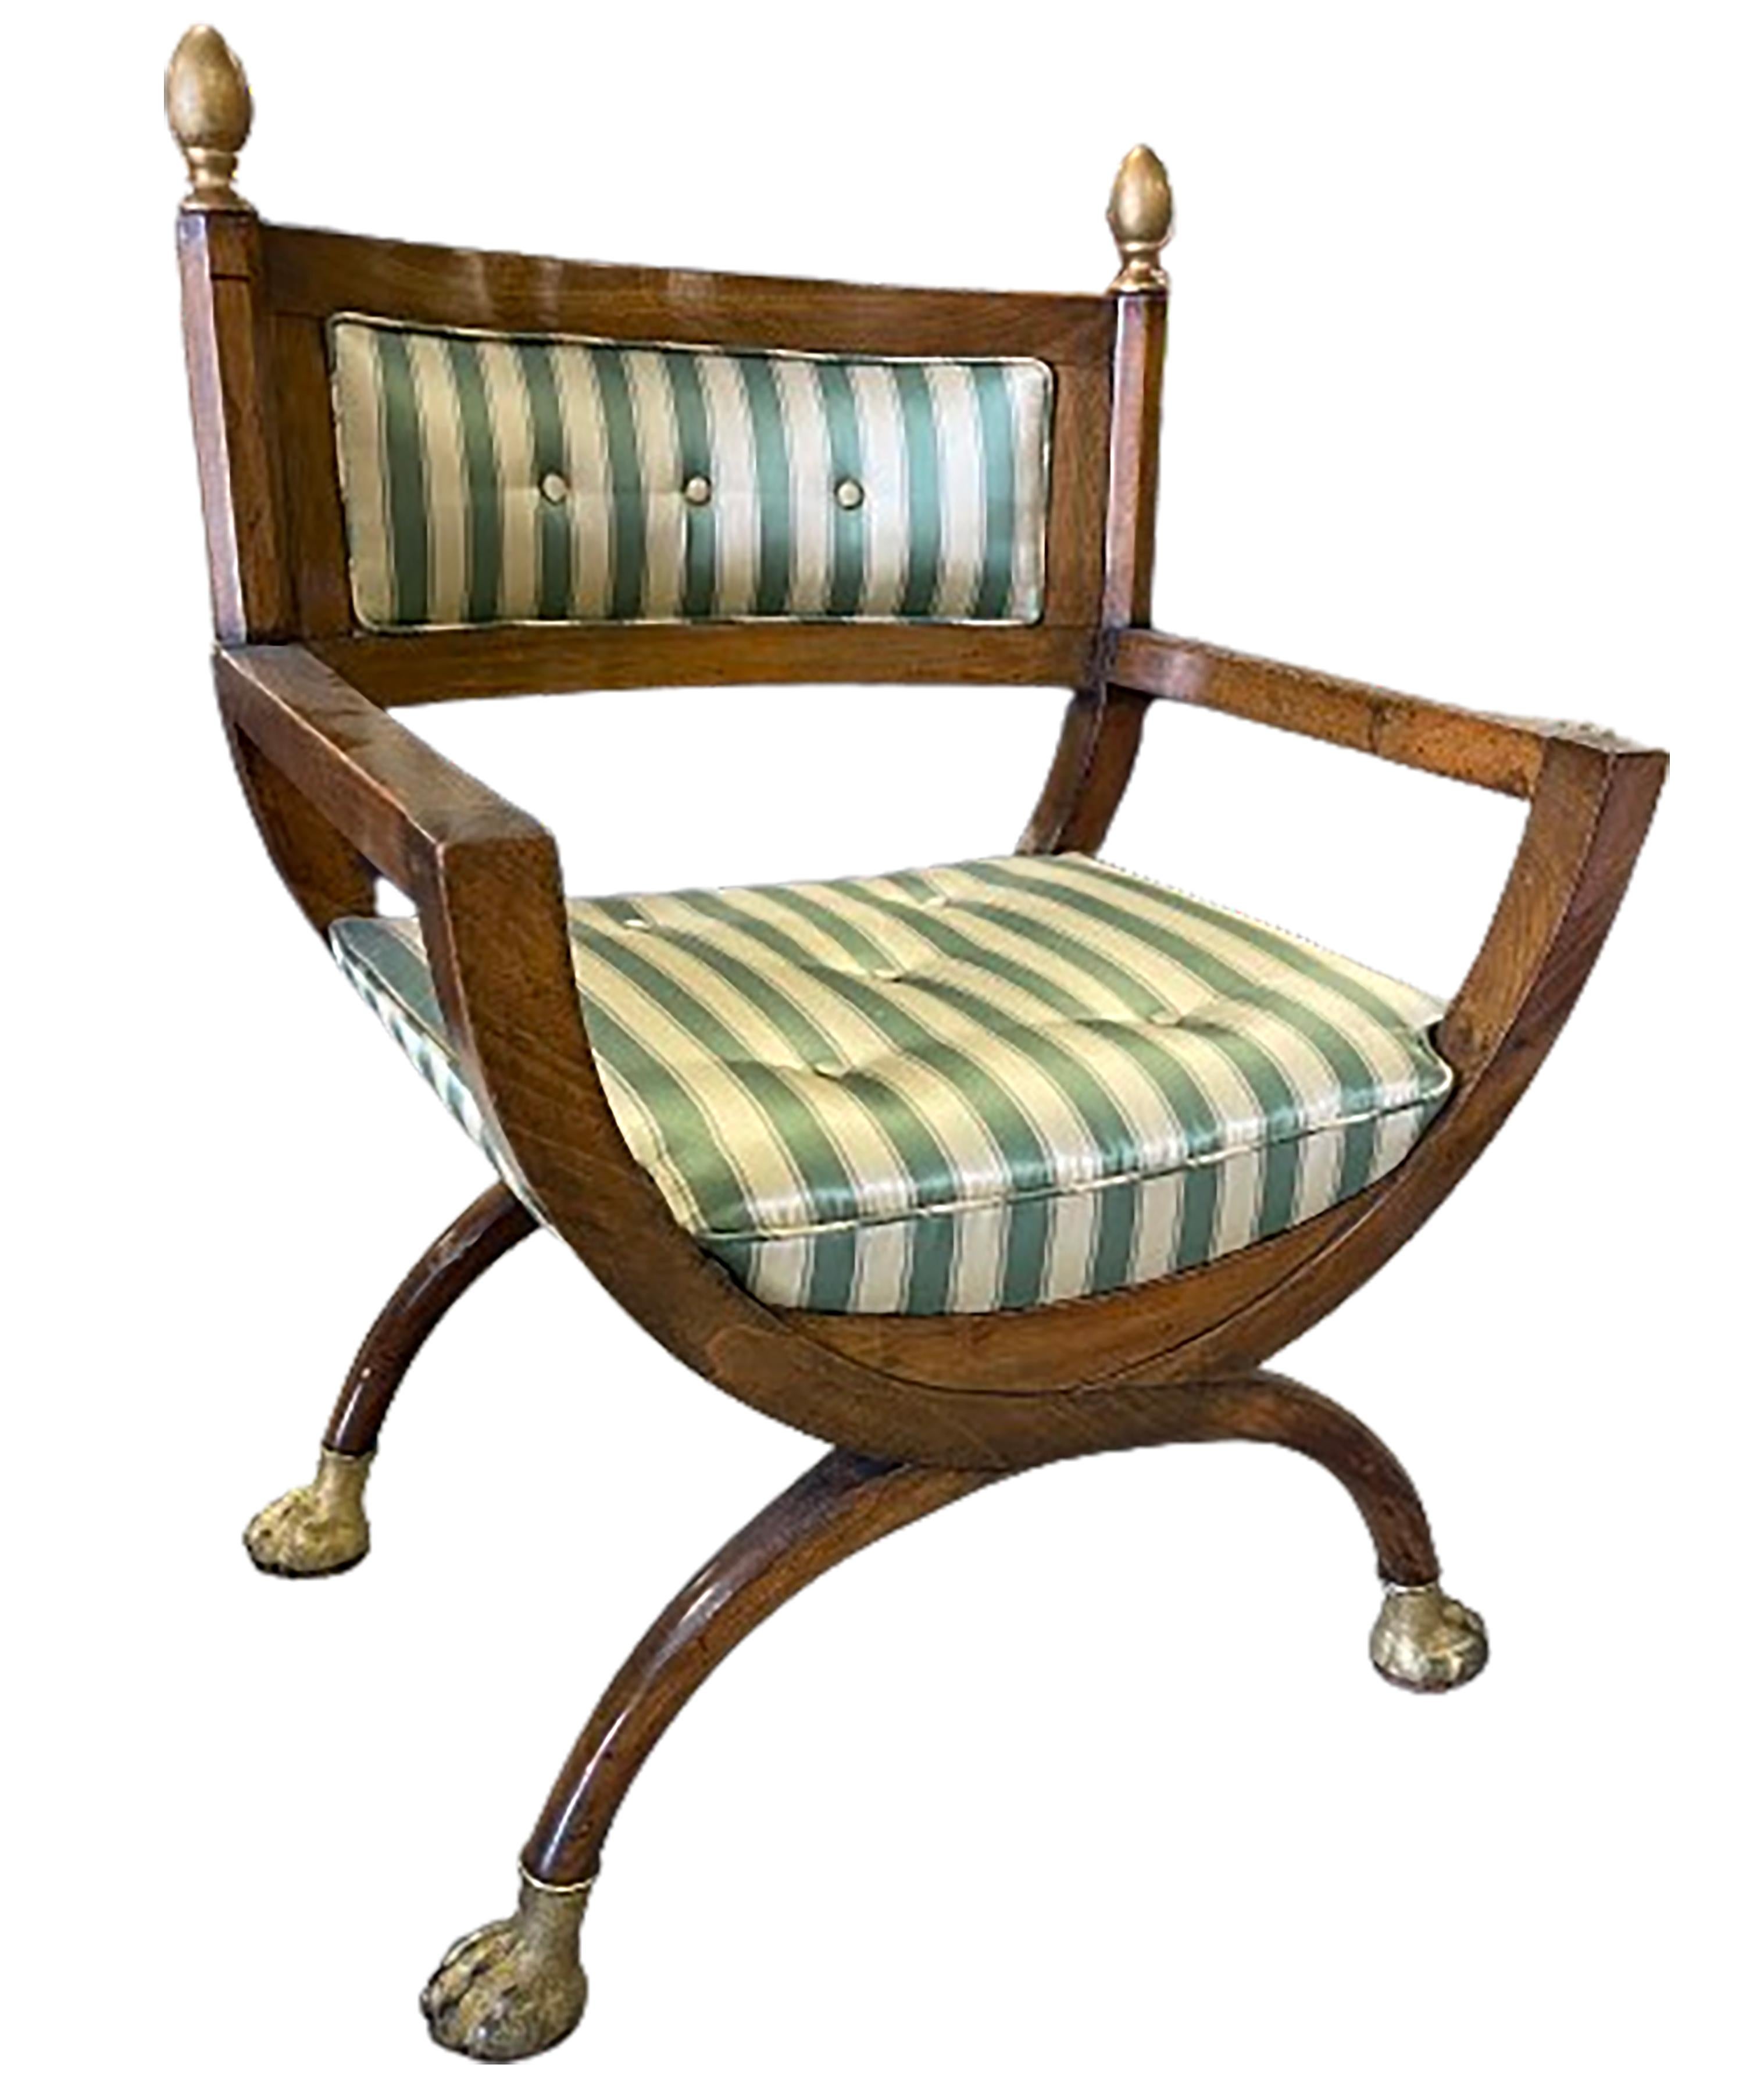 A handsome antique empire style campaign armchair, walnut, with green and white striped fabric cushions for seat and back. Brass lion paw feet. Half circle shape arms and legs for top. The clean lines being especially indicative of this style of